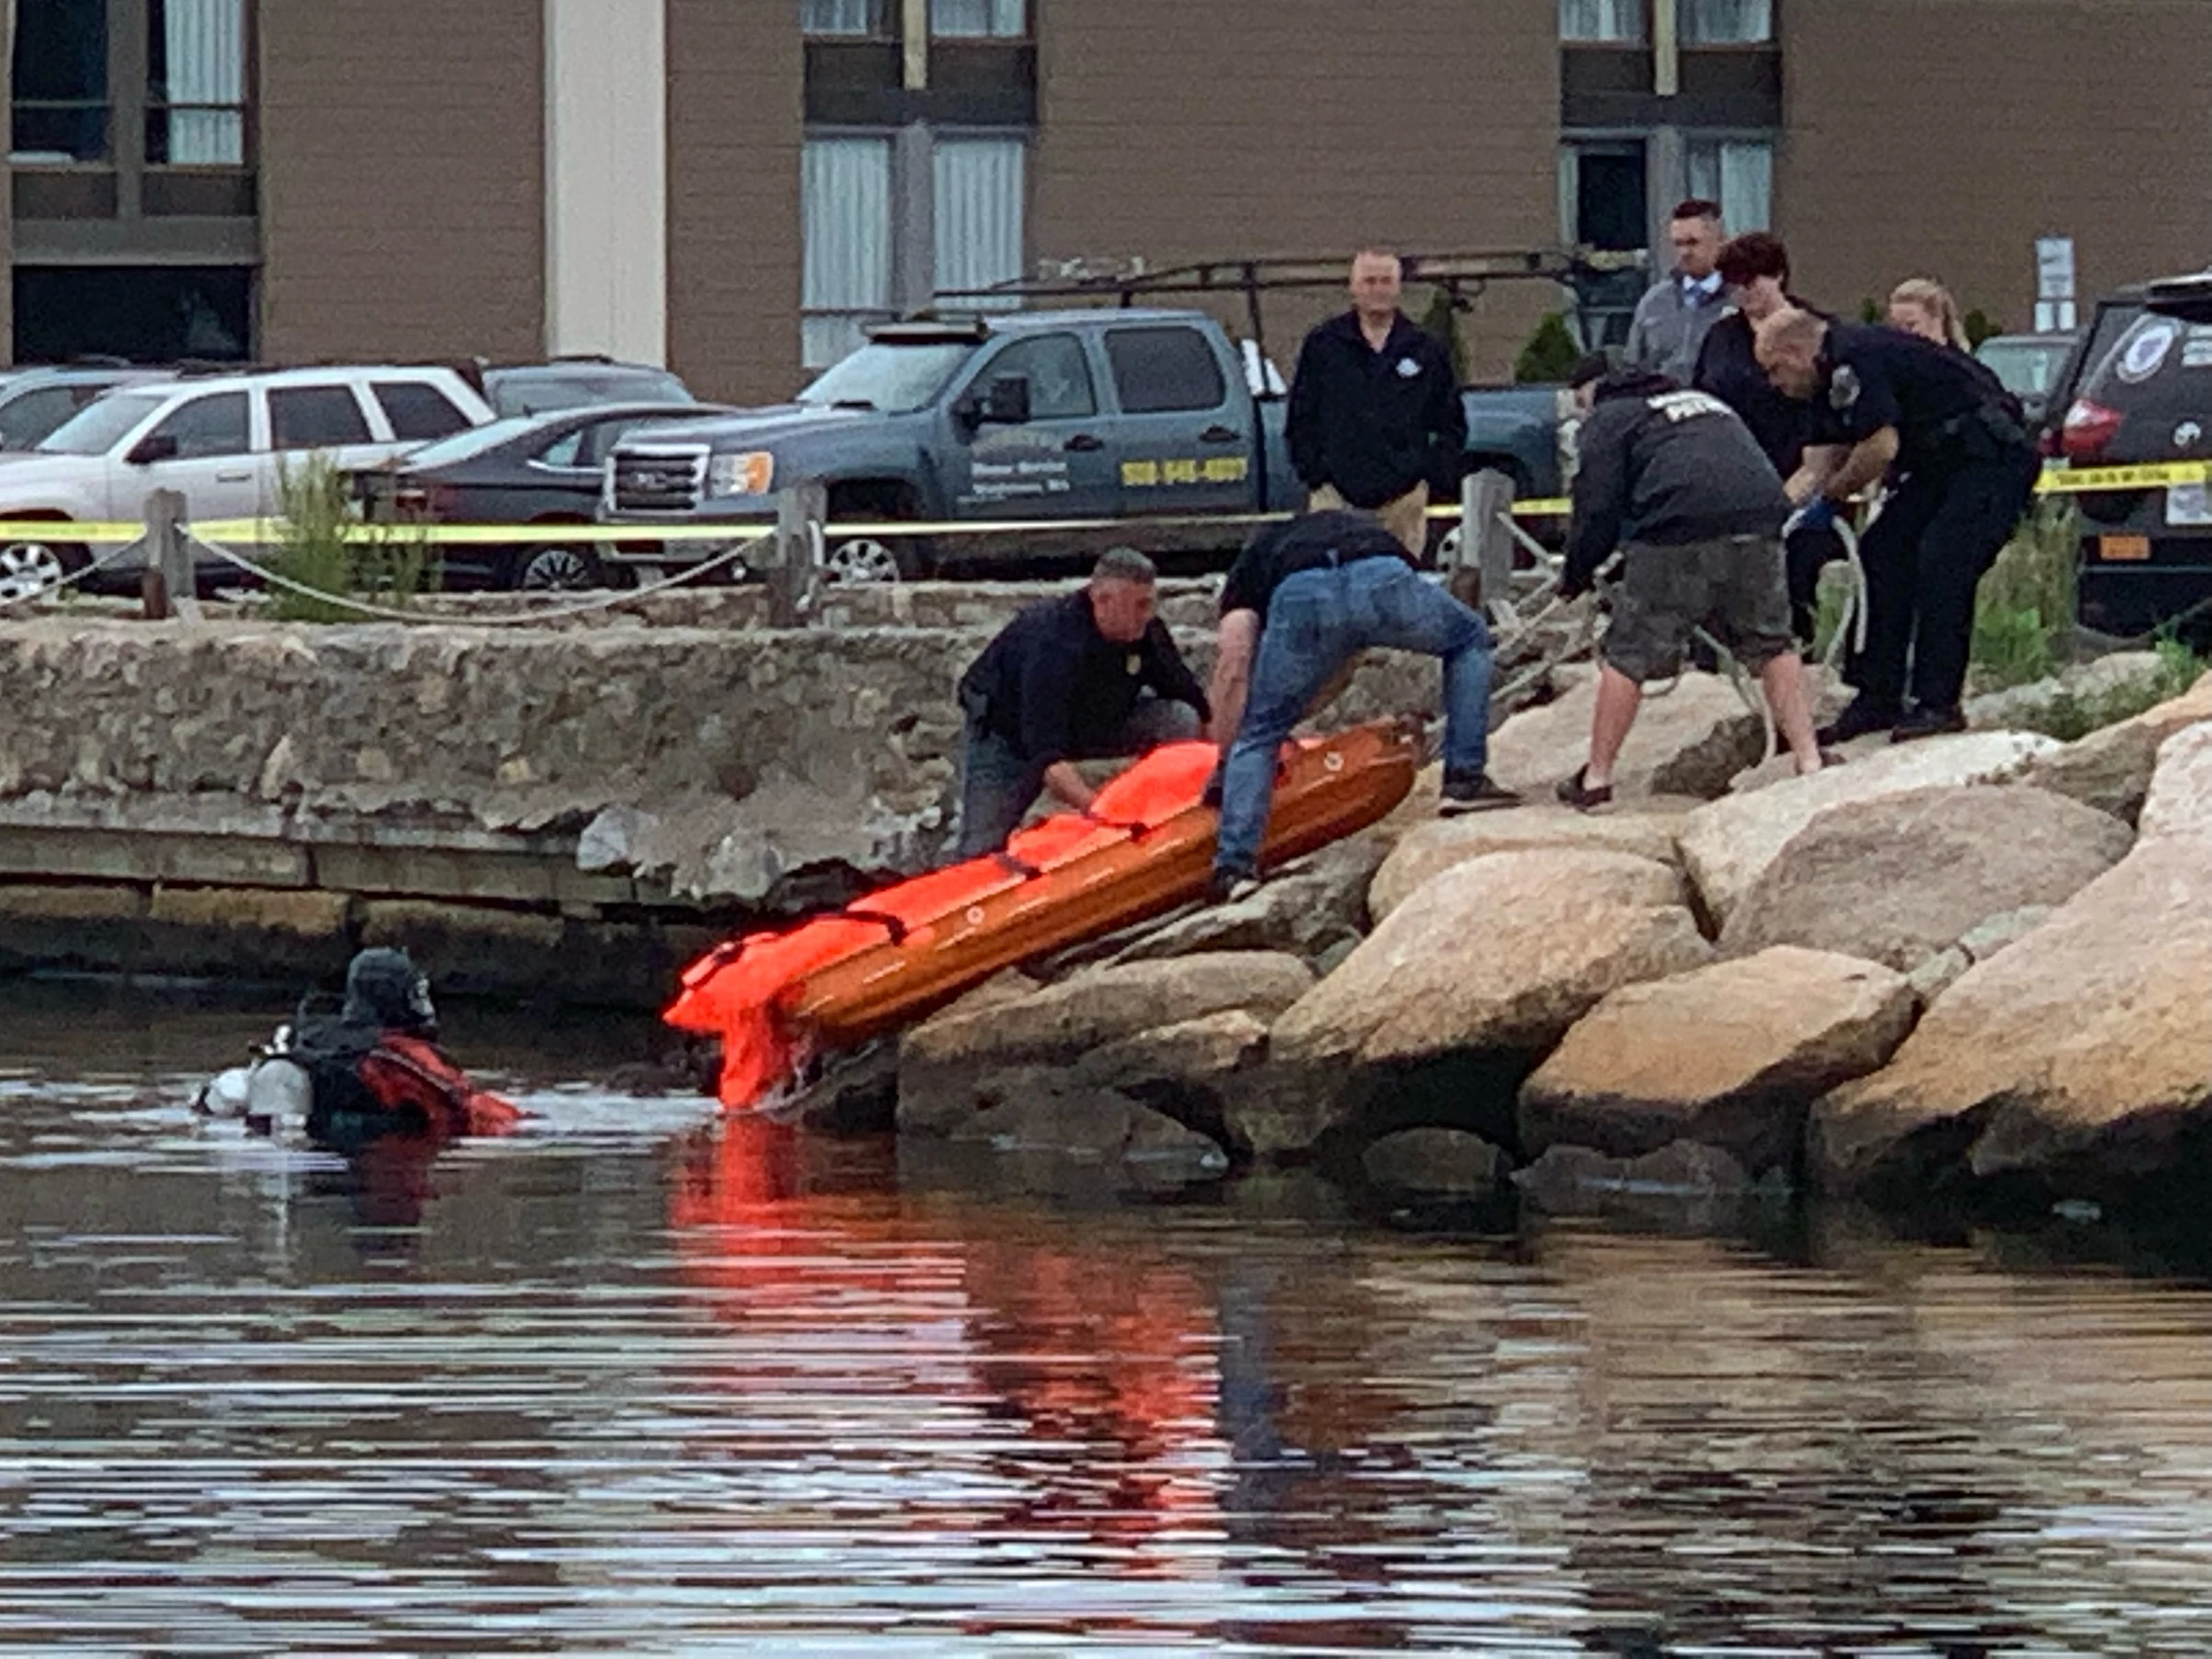 Fairhaven Police Confirm Body Pulled from Water